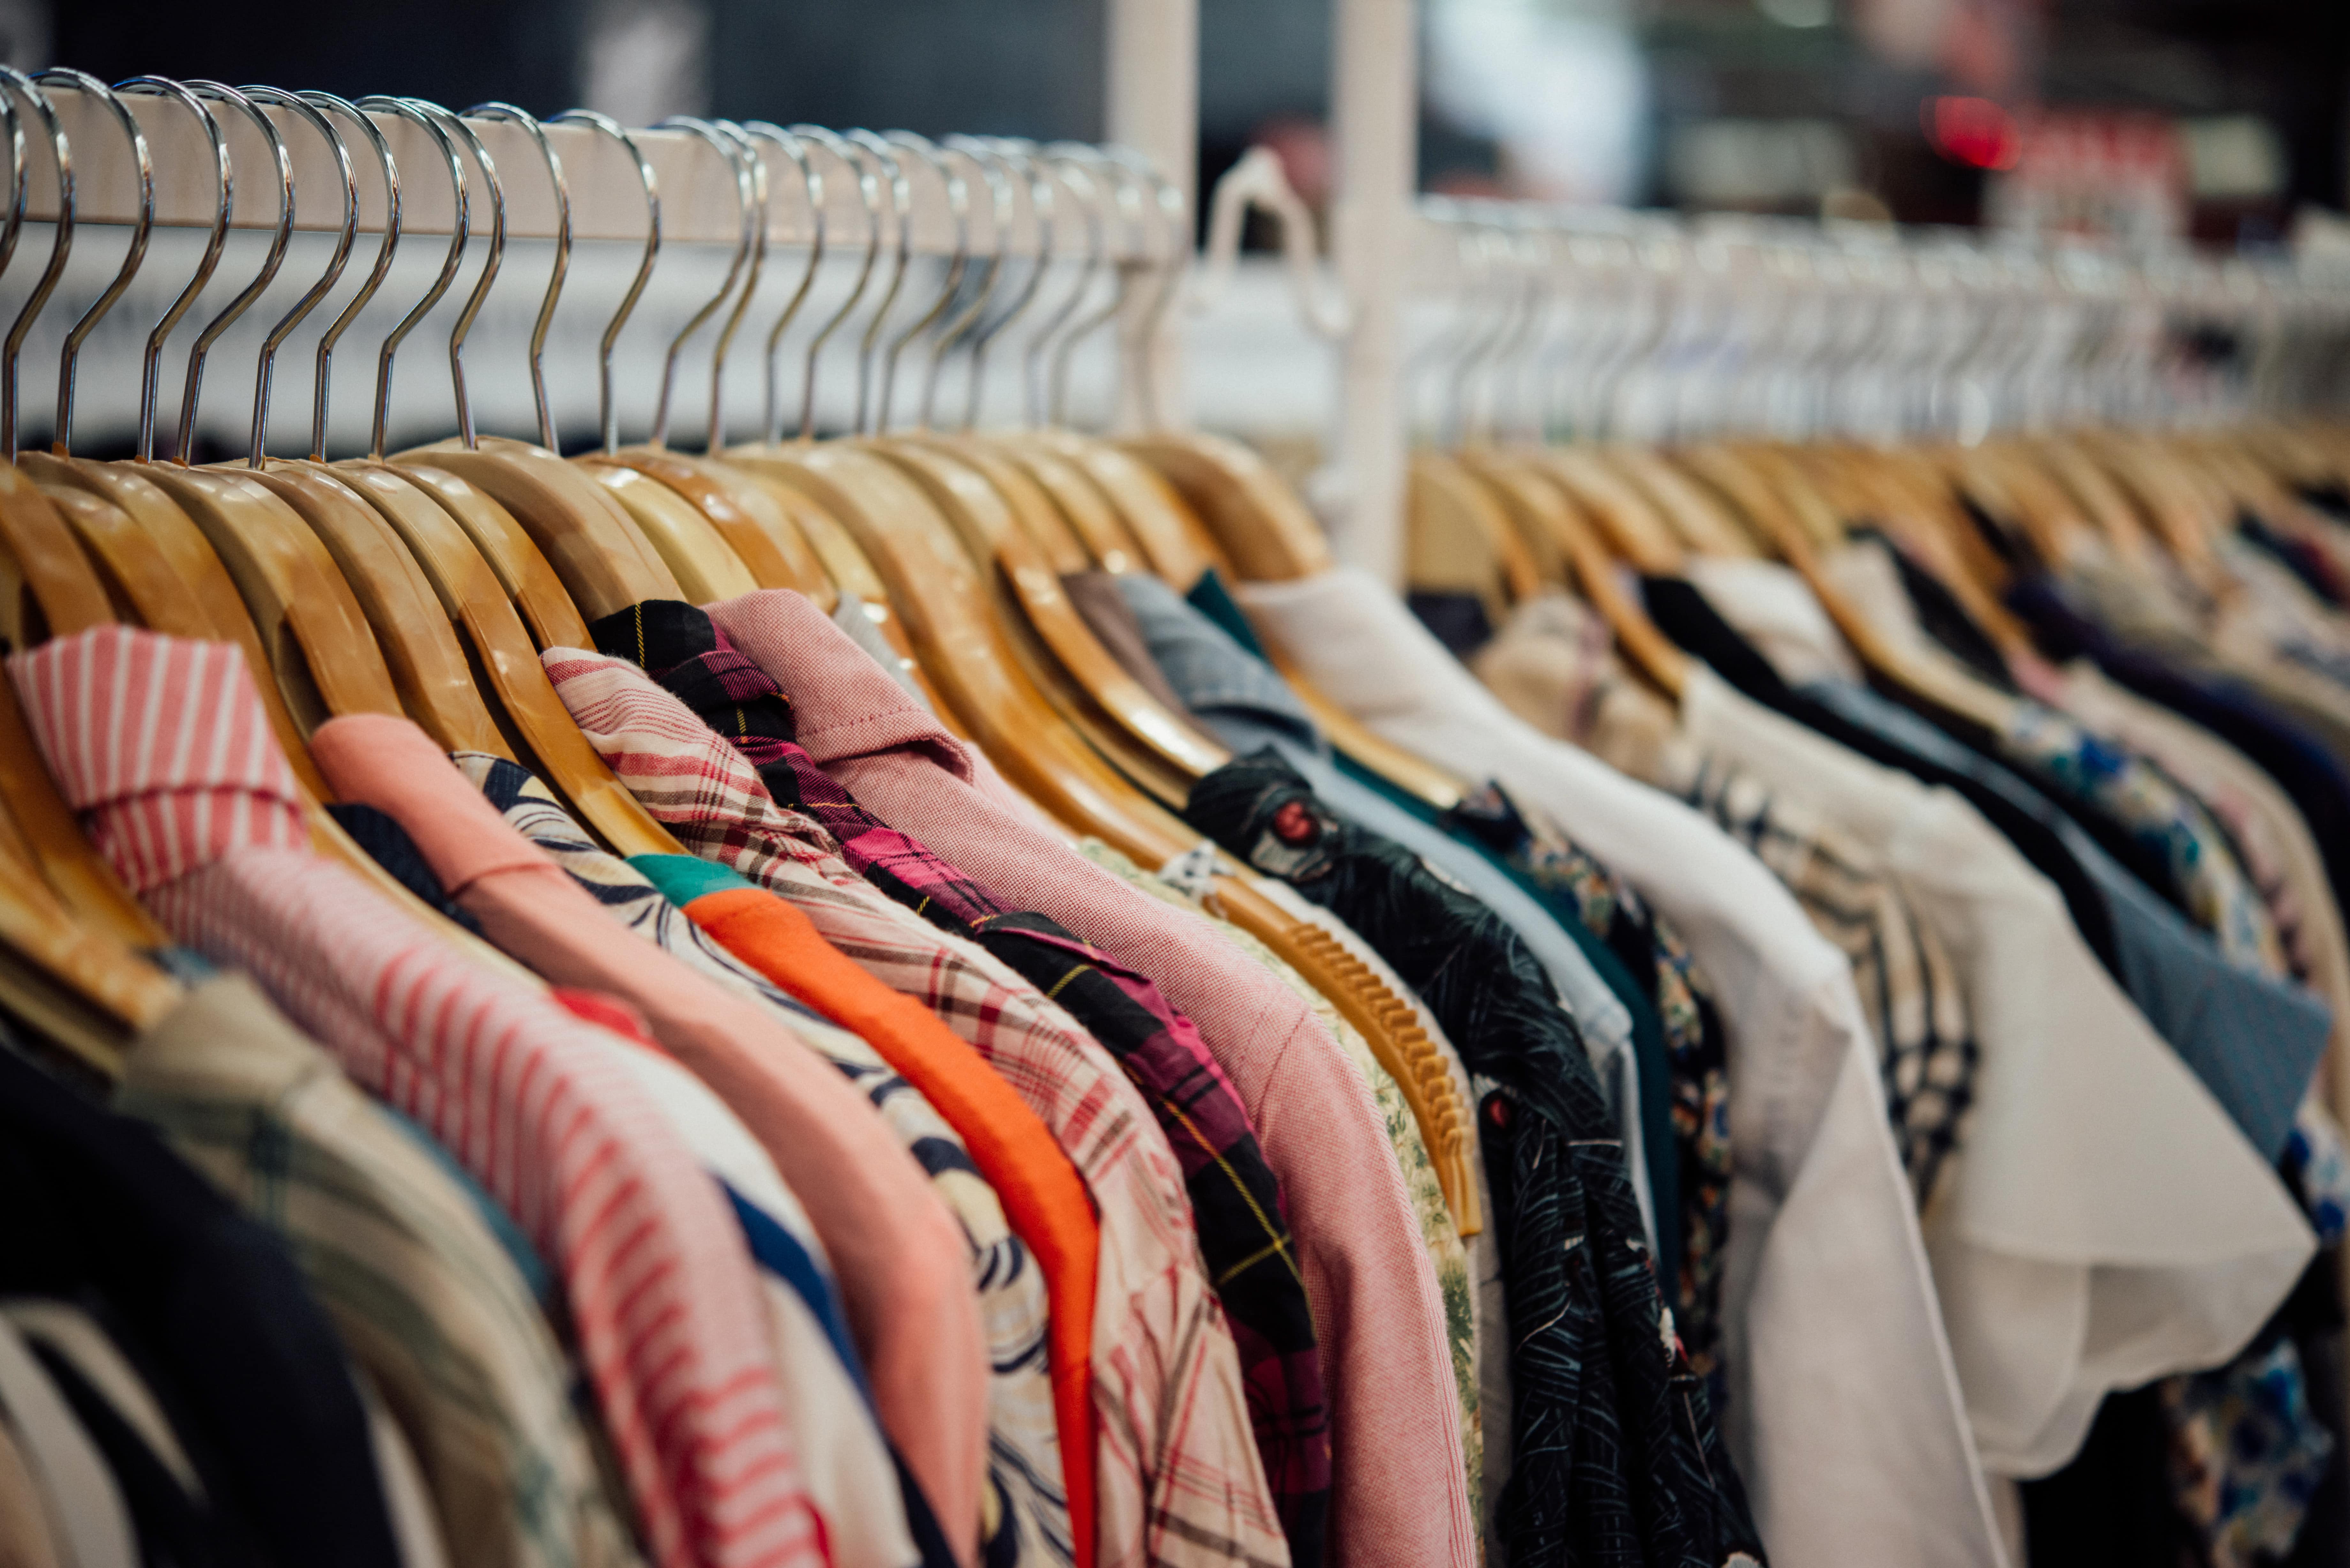 Thrift Shop Business: A Business Opportunity from Used Clothing